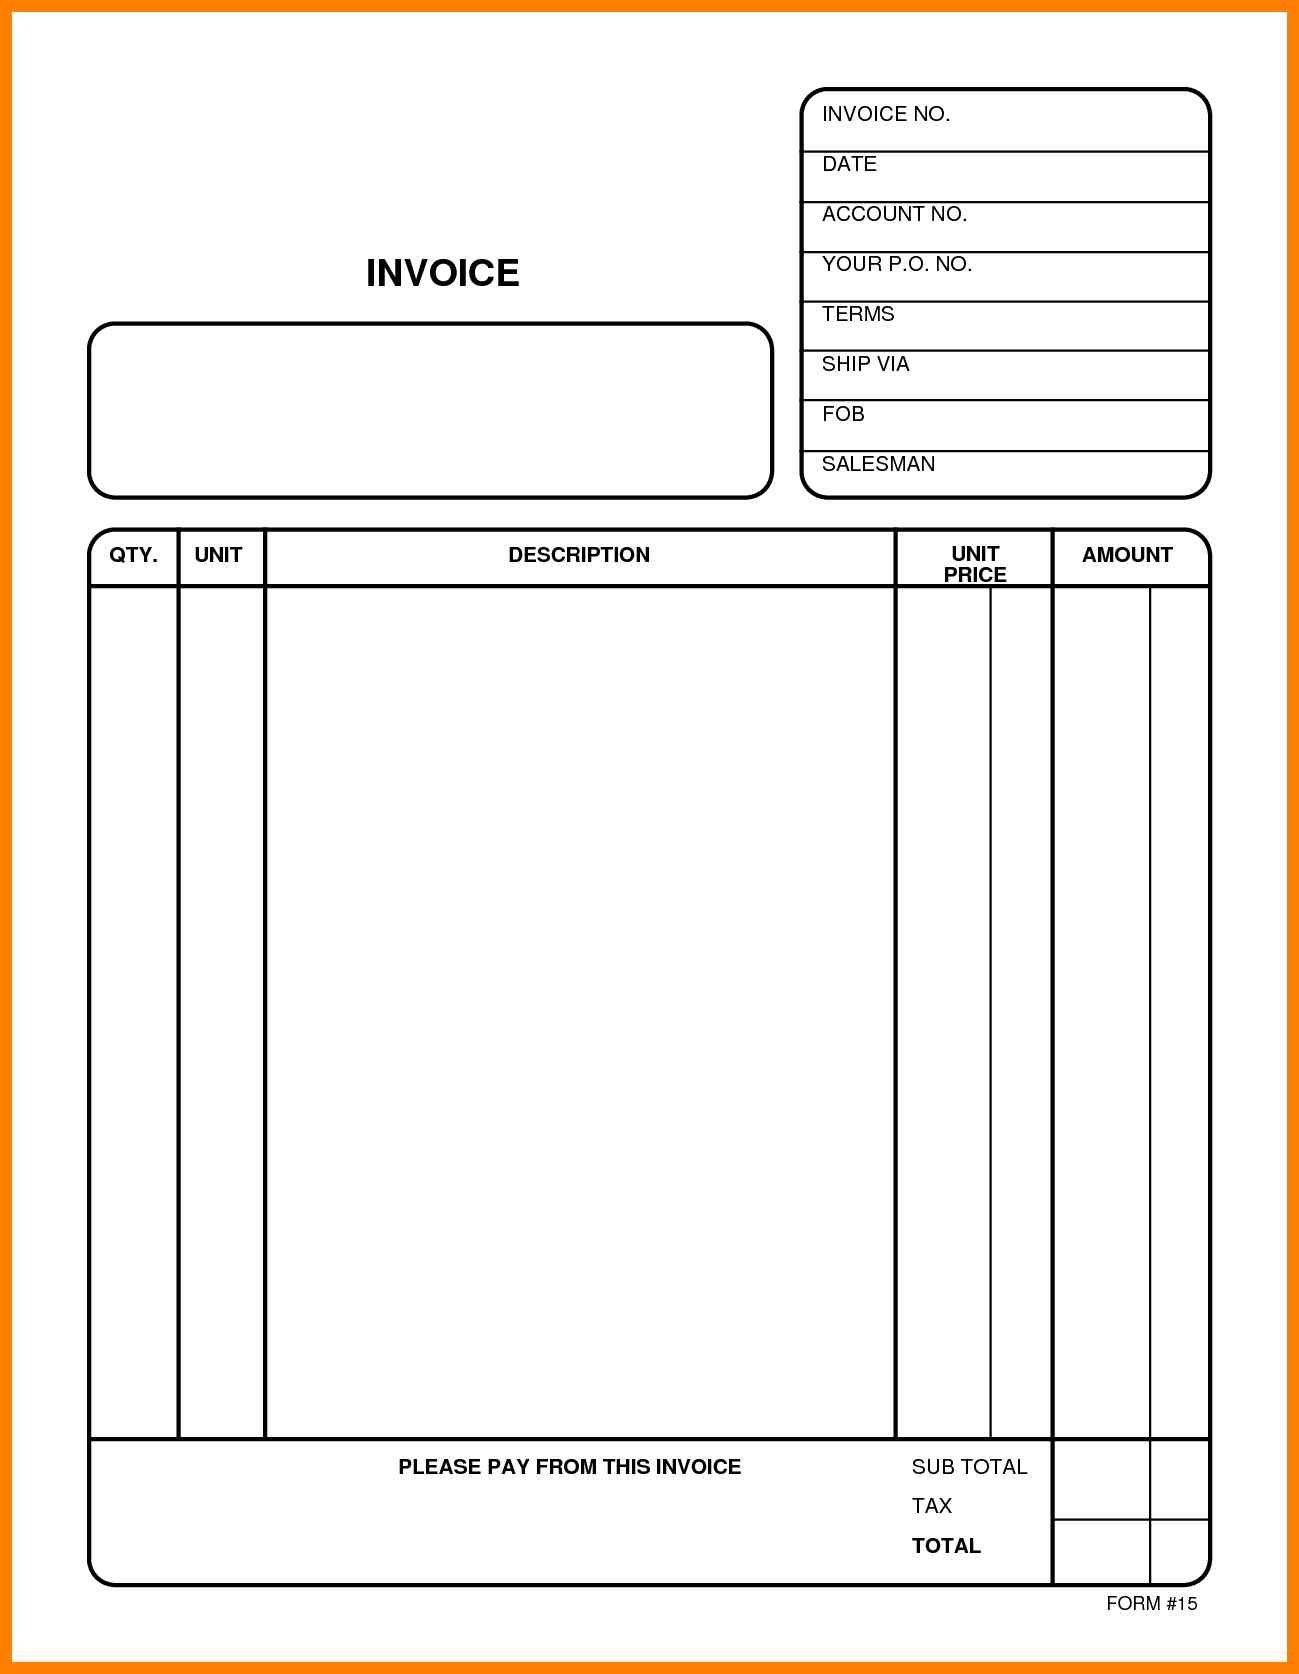 Copy Of A Blank Invoice Invoice Template Free 2016 Copy Of Blank Free 